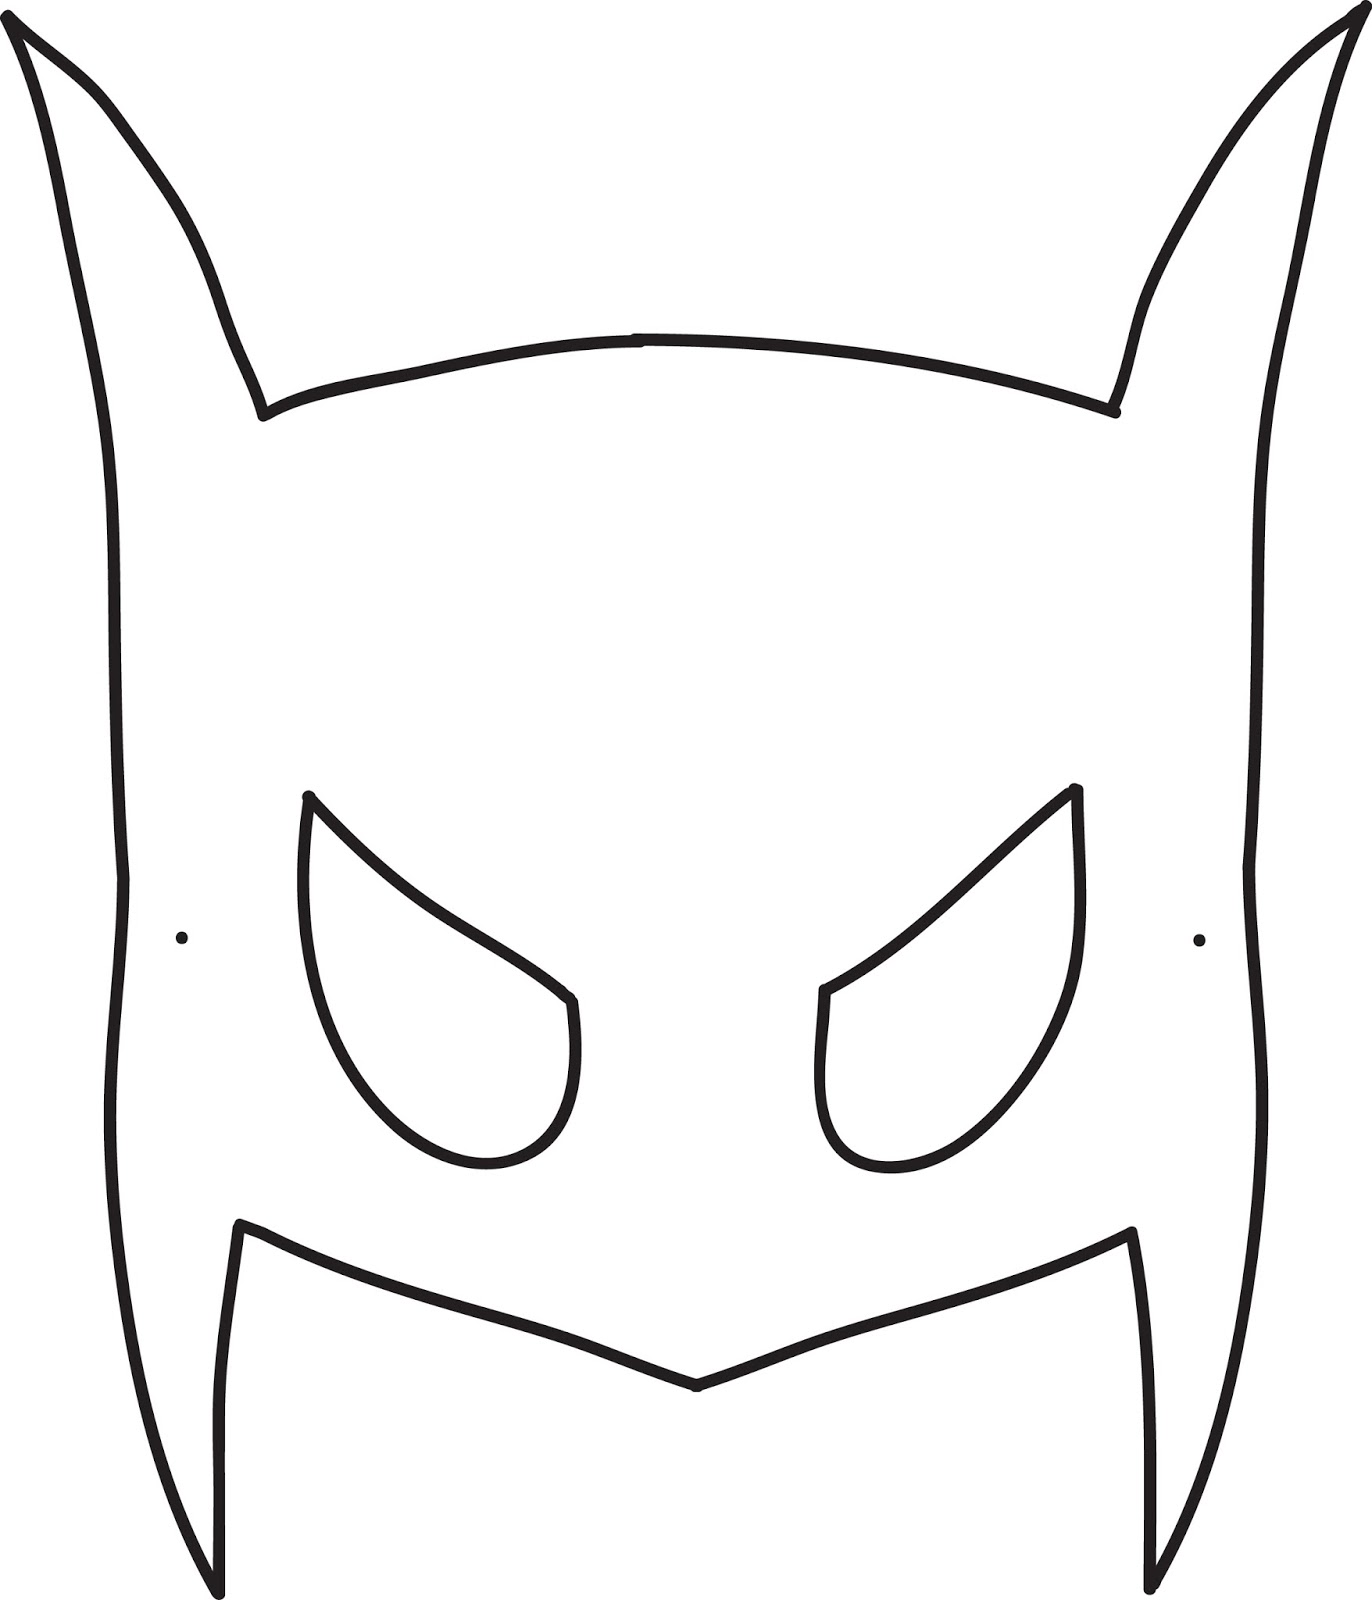 Best Photos of Robin Face Mask Template - Batman and Robin Mask ...